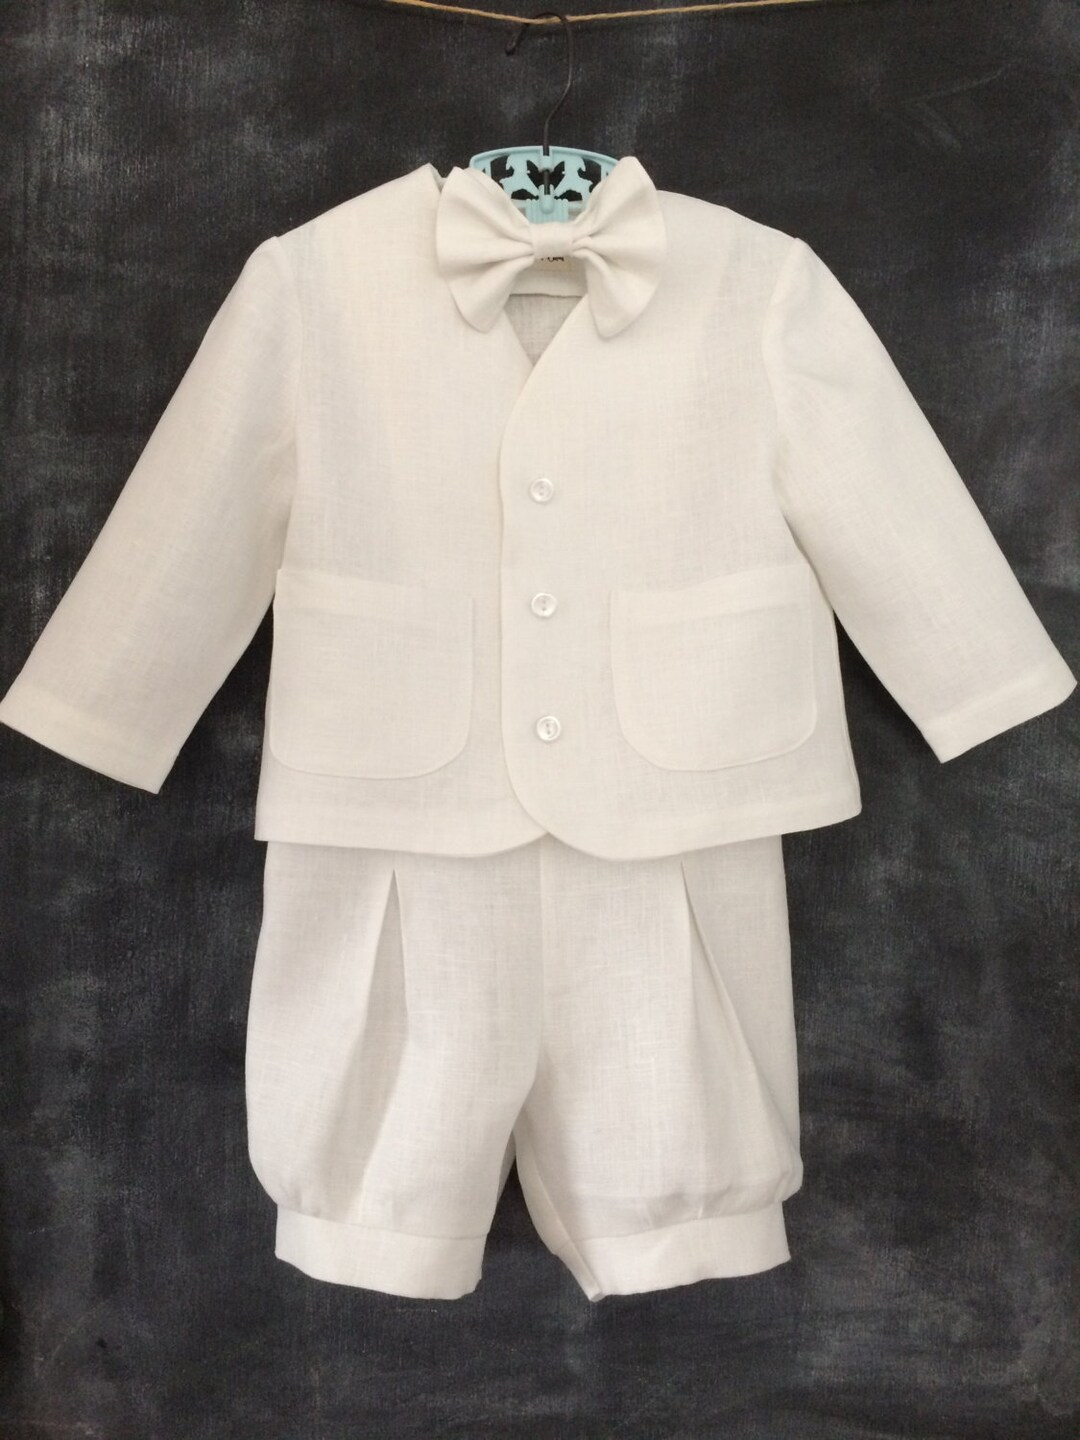 Baby Boy Baptism Suit Toddler Linen Baptism Outfit Boys Ring - Etsy